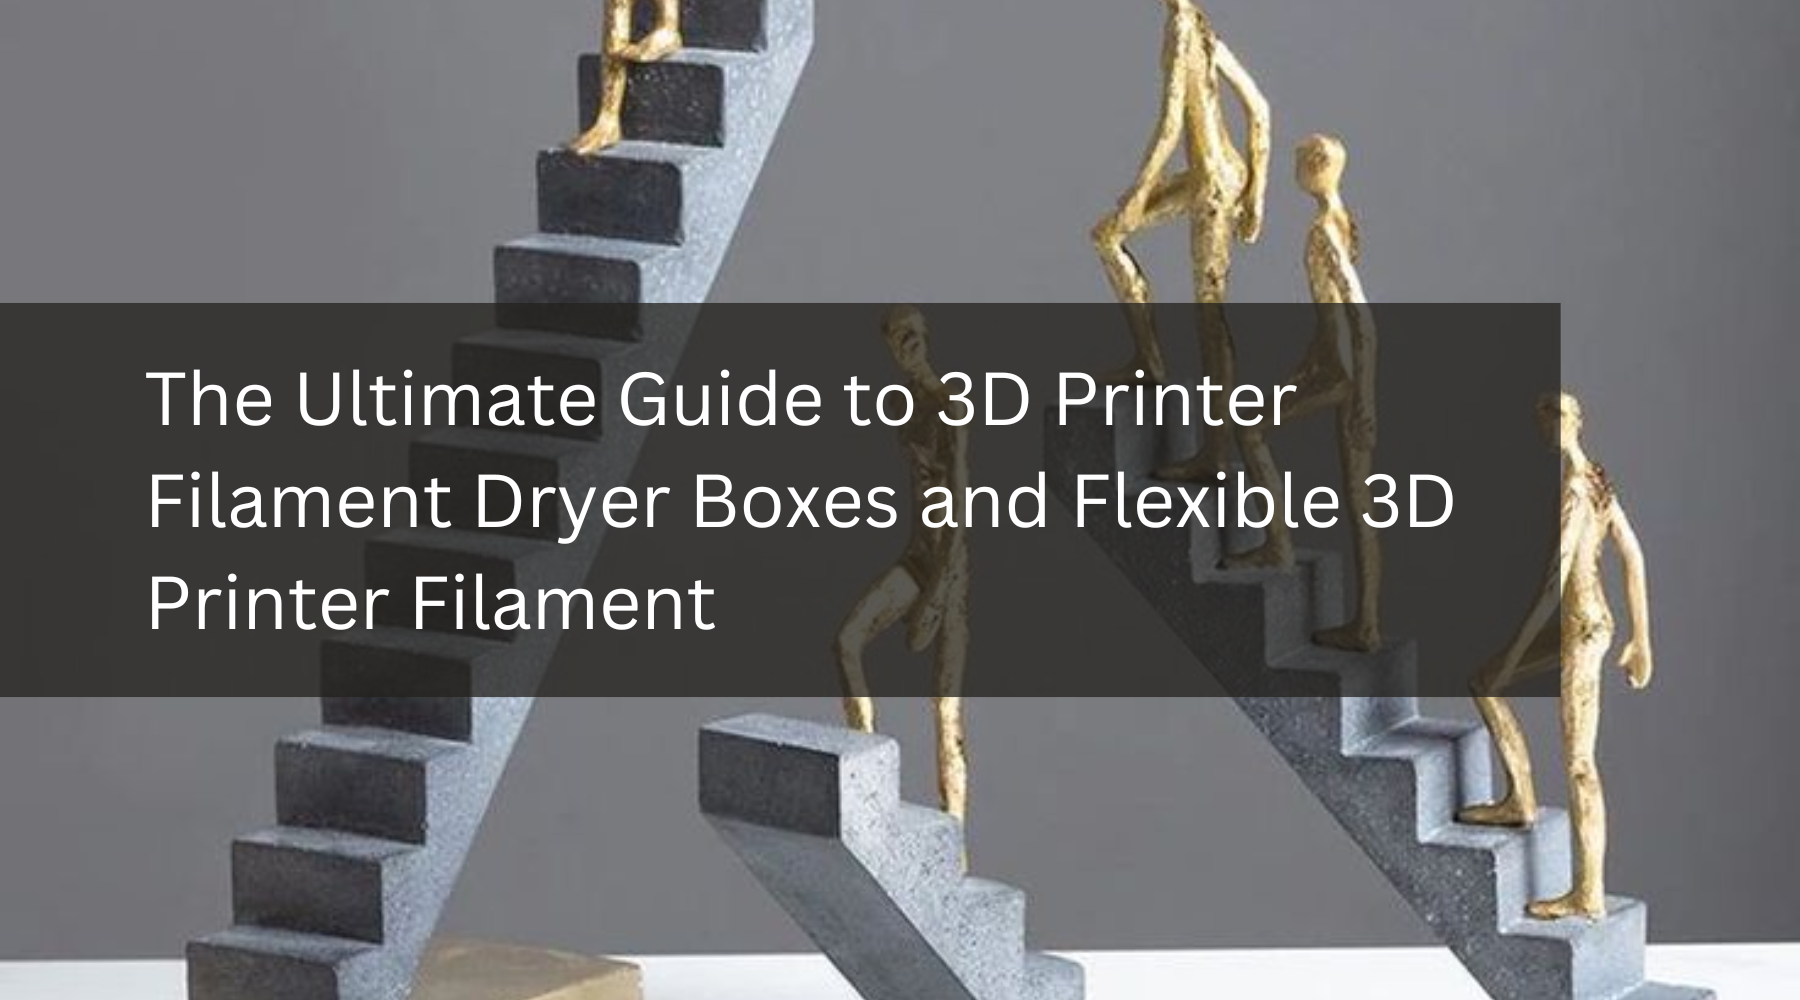 The Ultimate Guide to 3D Printer Filament Dryer Boxes and Flexible 3D Printer Filament